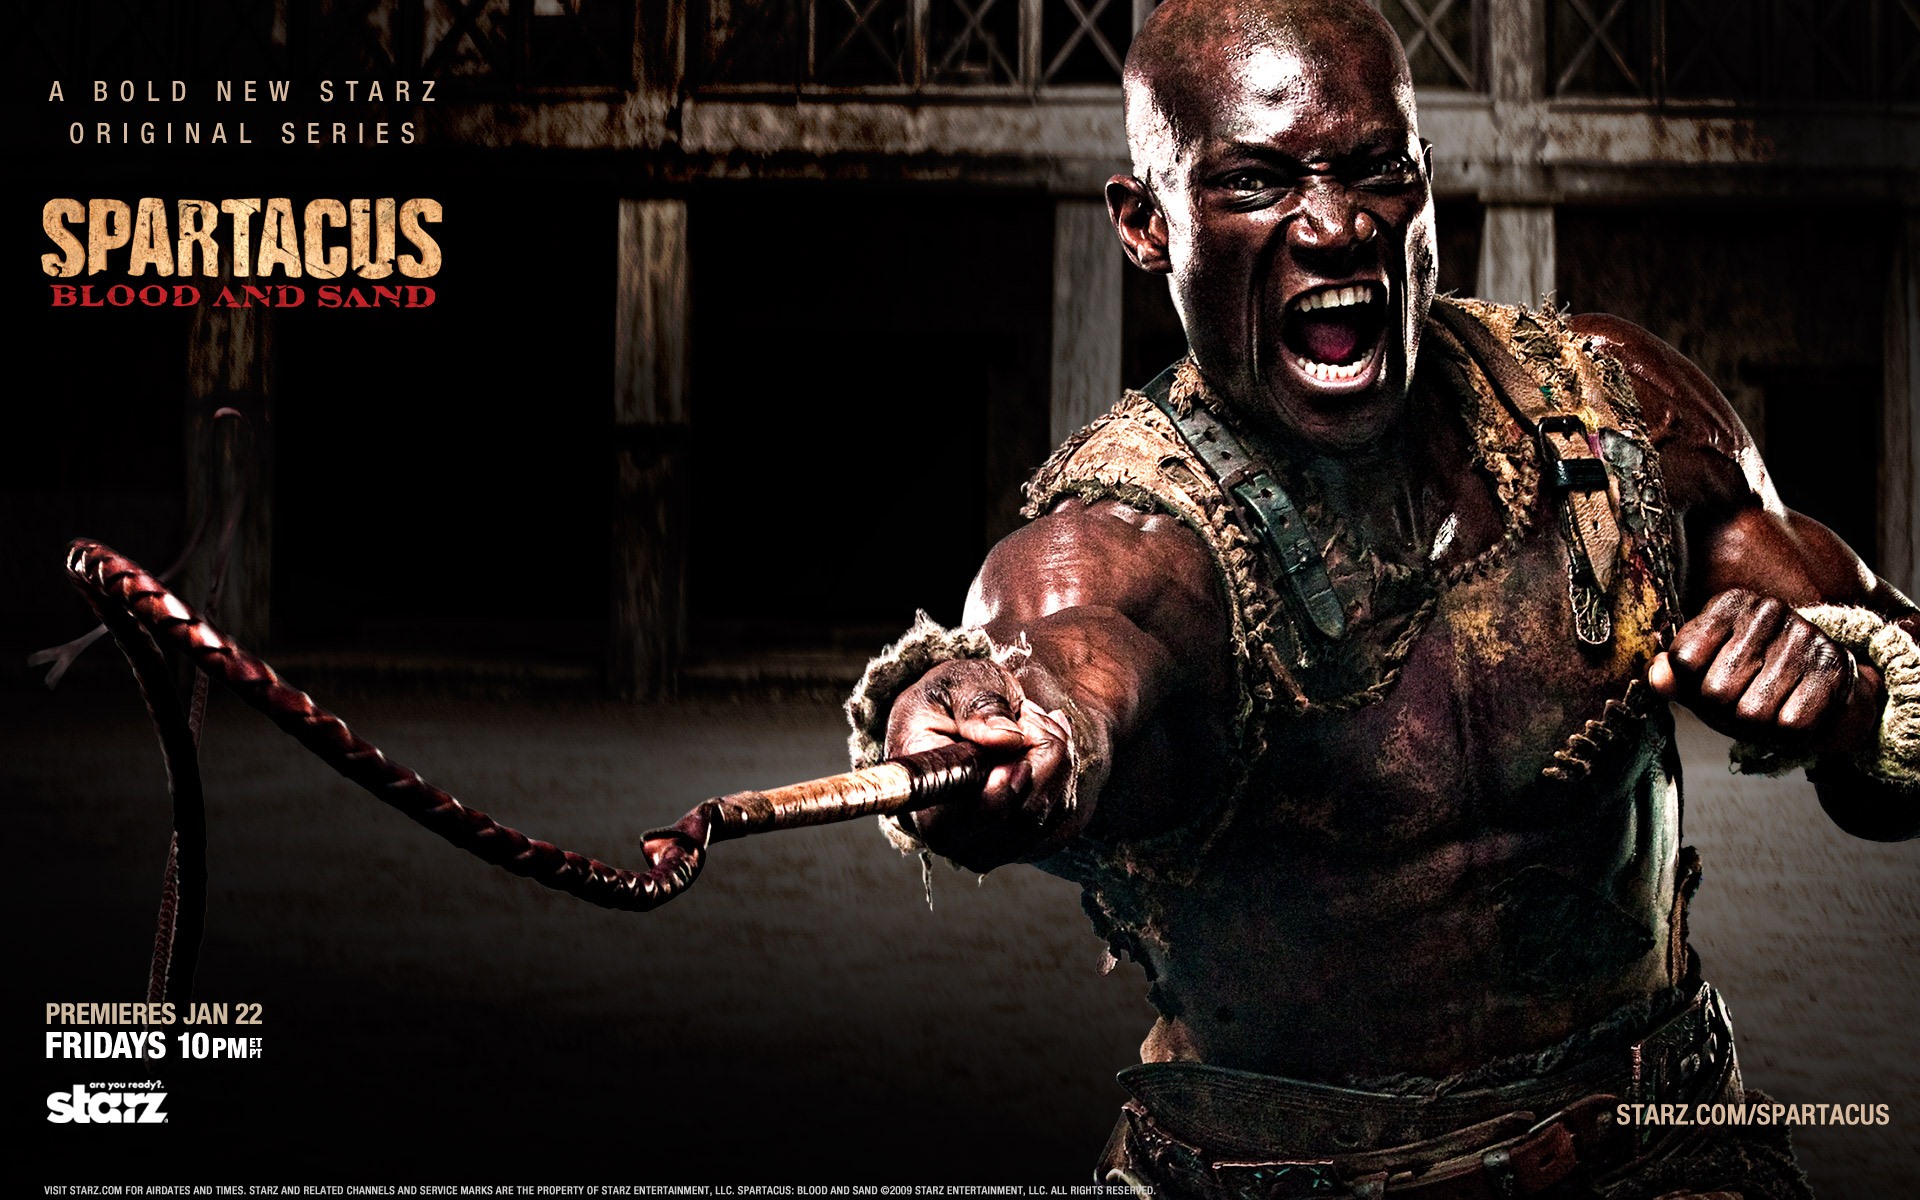 Spartacus Blood And Sand Hd Wallpapers 5 19x10 Wallpaper Download Spartacus Blood And Sand Hd Wallpapers Moive Wallpapers V3 Wallpaper Site